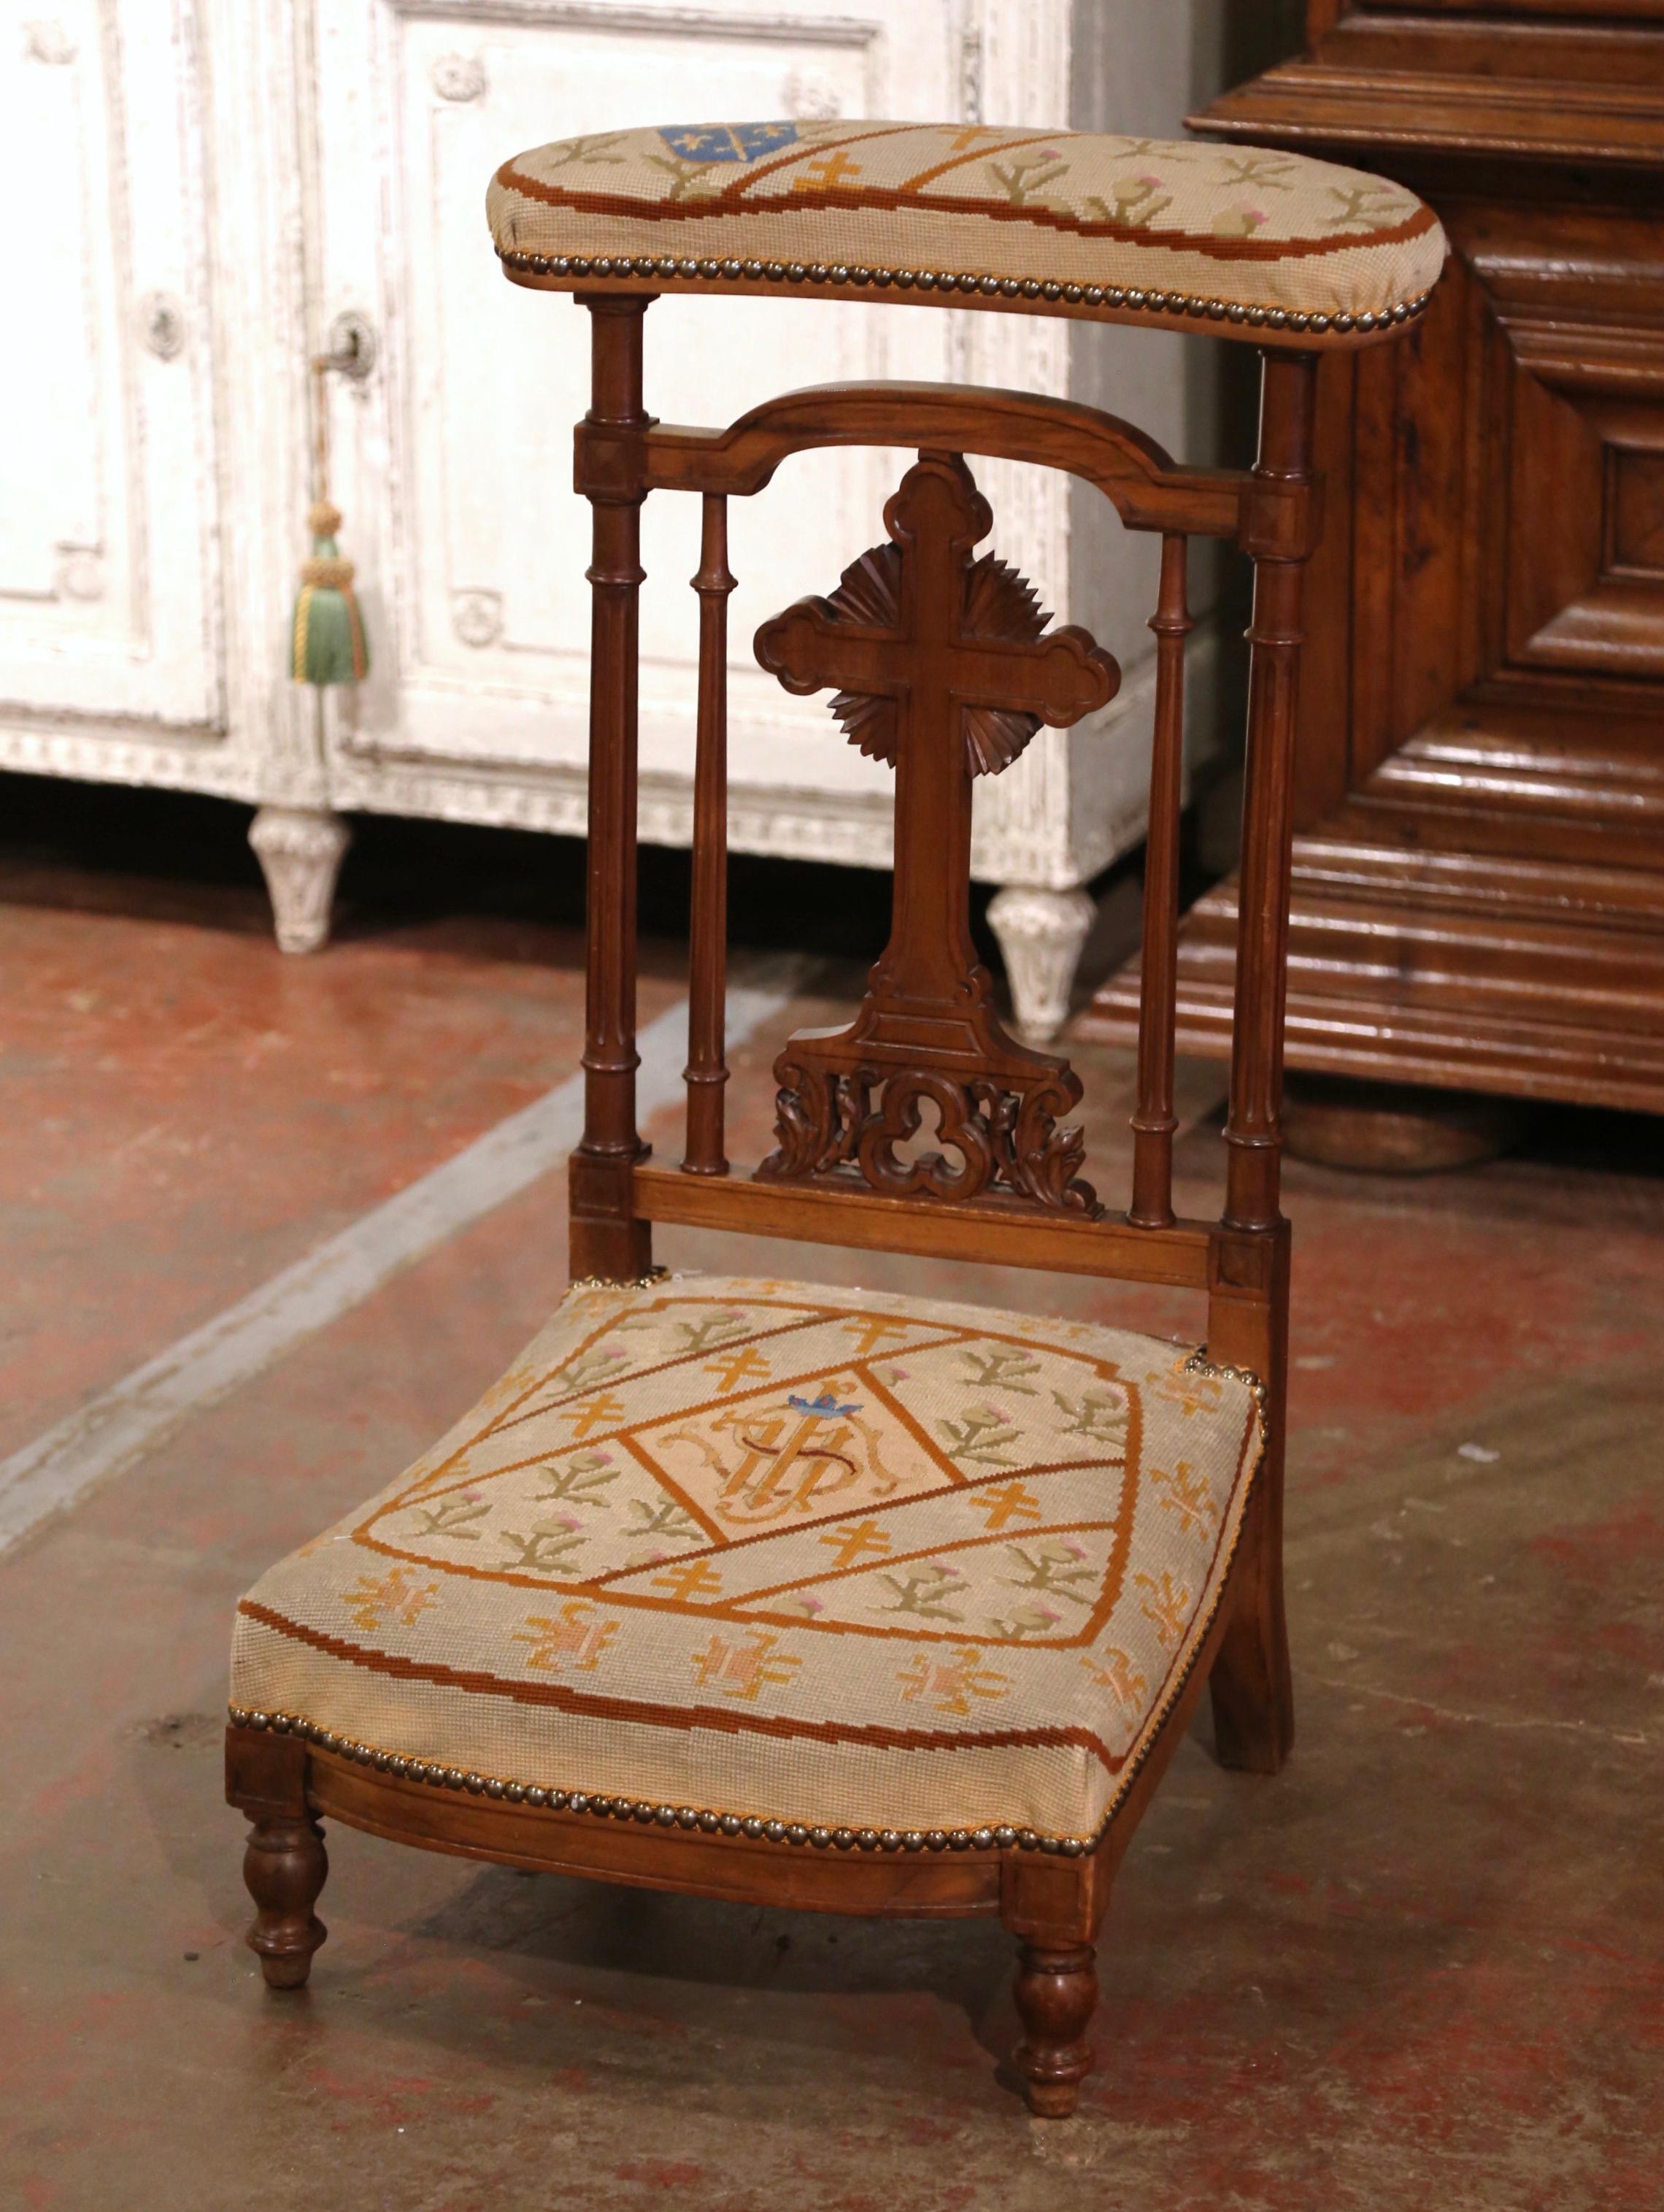 Place this elegant antique prayer chair in your bedroom for daily devotions or your living room or office for a beautiful religious accent. Crafted in France, circa 1870, the traditional kneeler stands on carved feet over a scalloped apron. The back